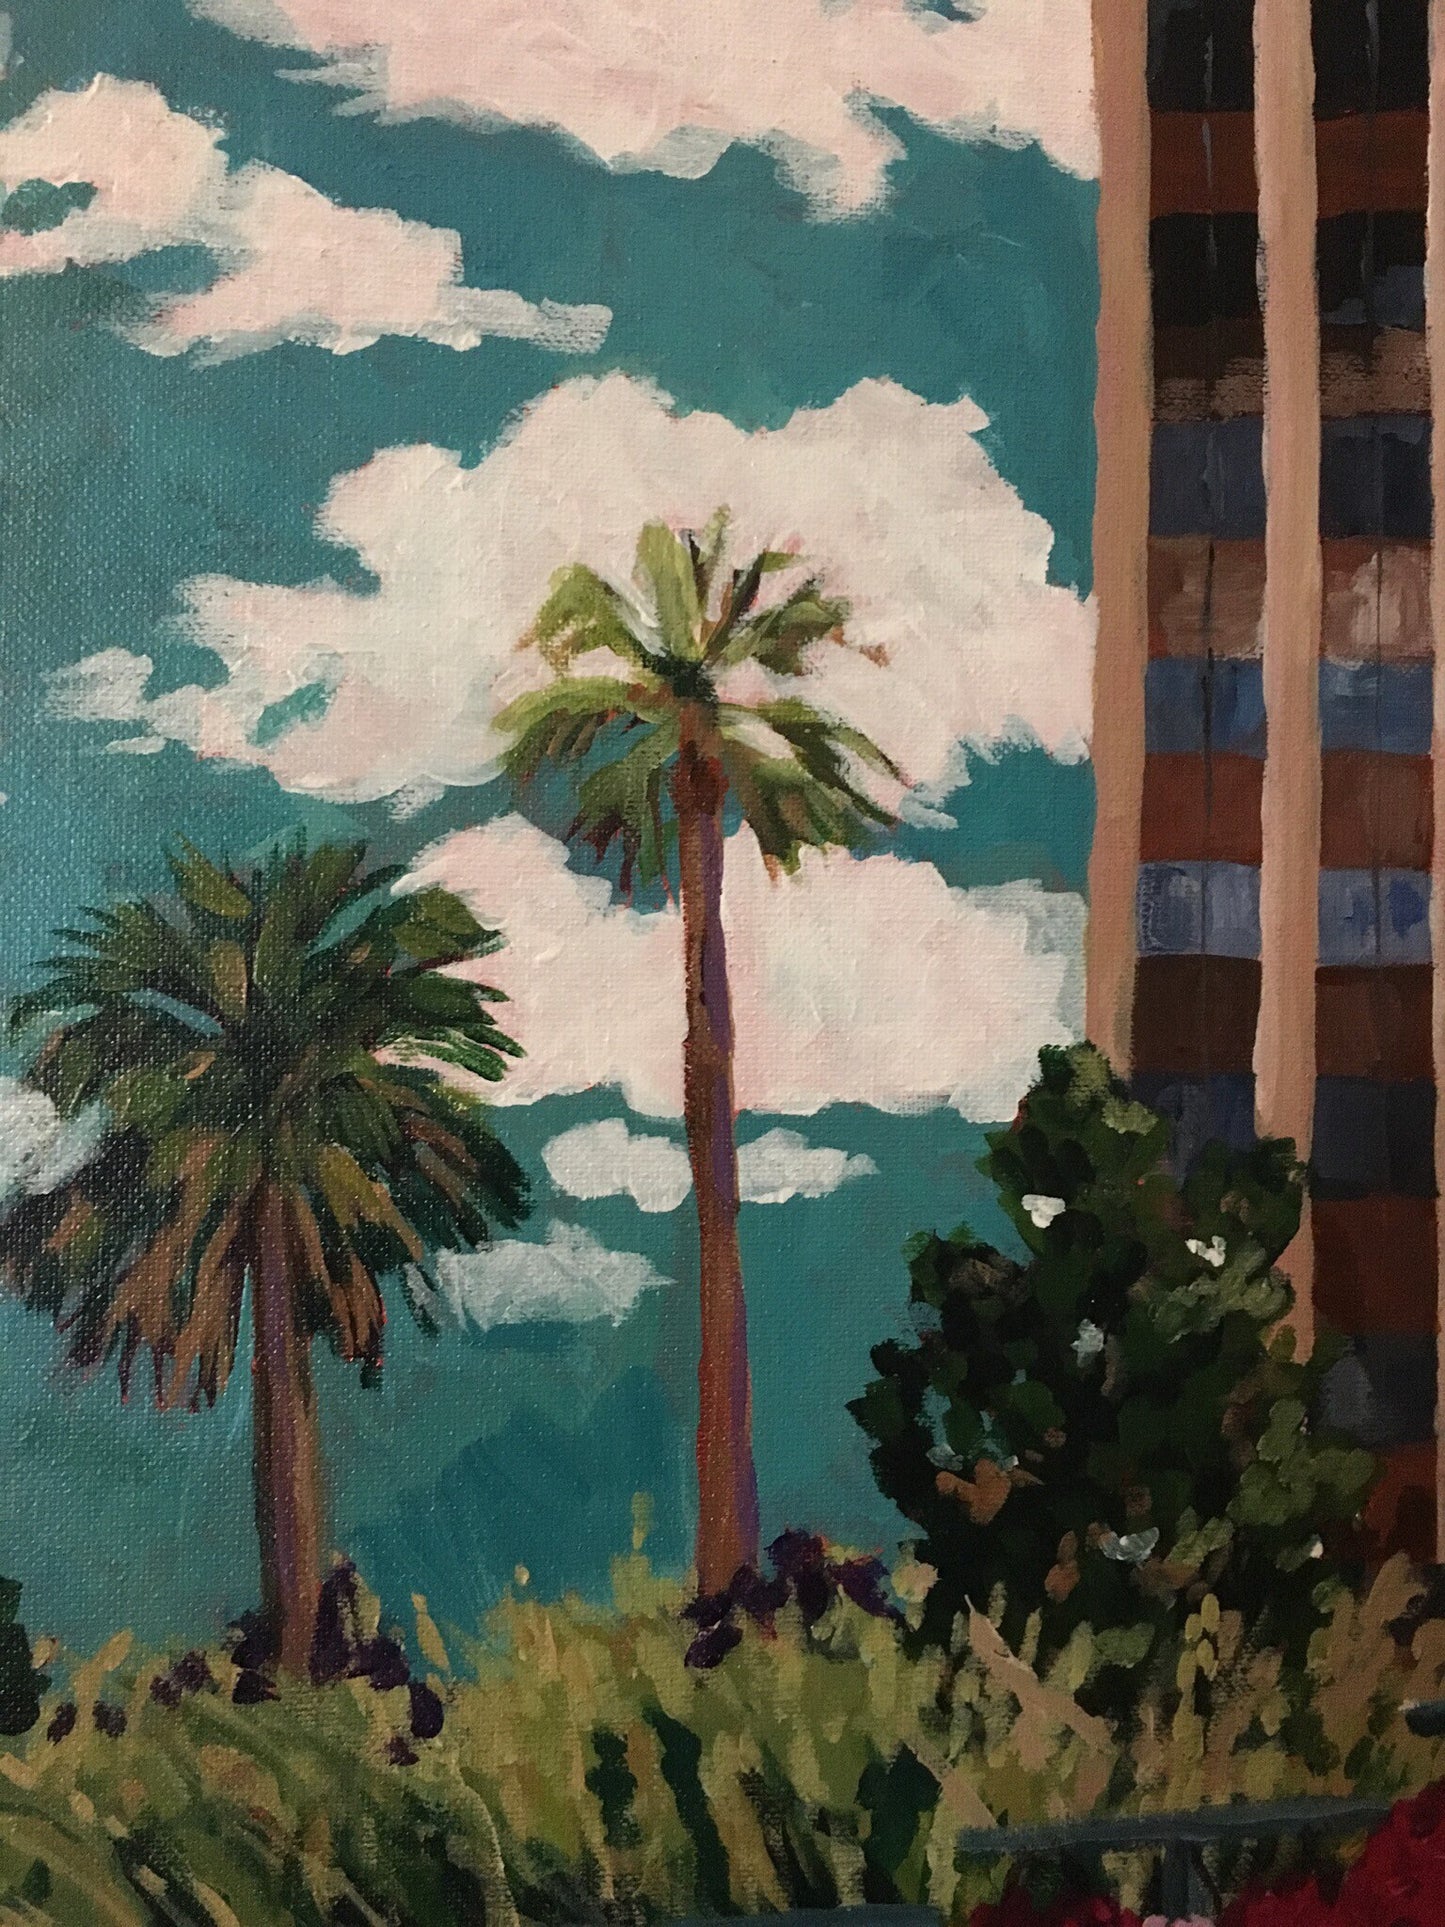 detail of the Orlando painting with palm trees and building